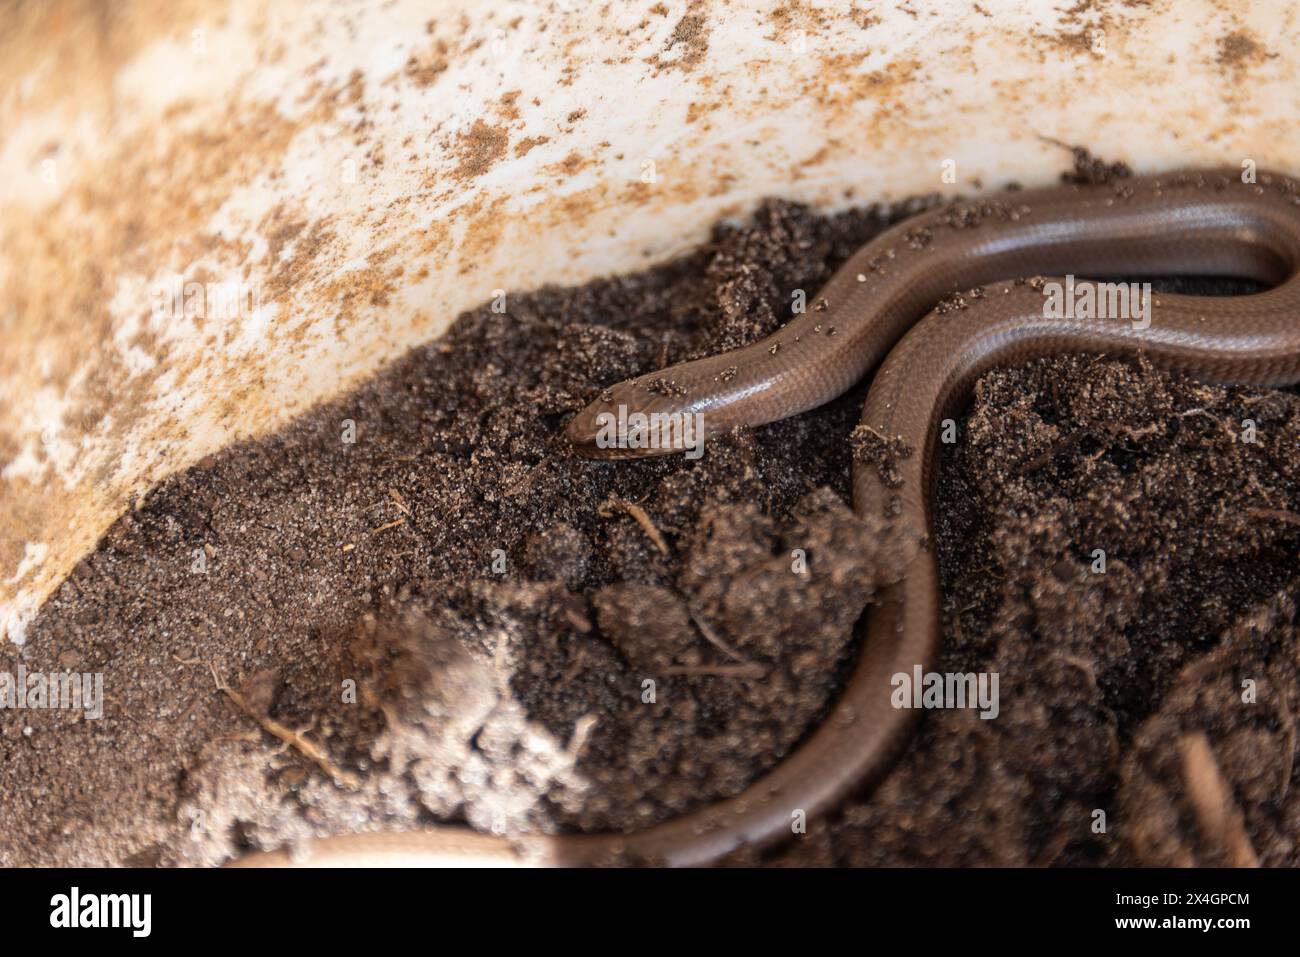 A selective focus of a small legless lizard, The scraggly spindle is a reptile, It is also called the deaf viper, blind worm or regionally. Garden. Stock Photo